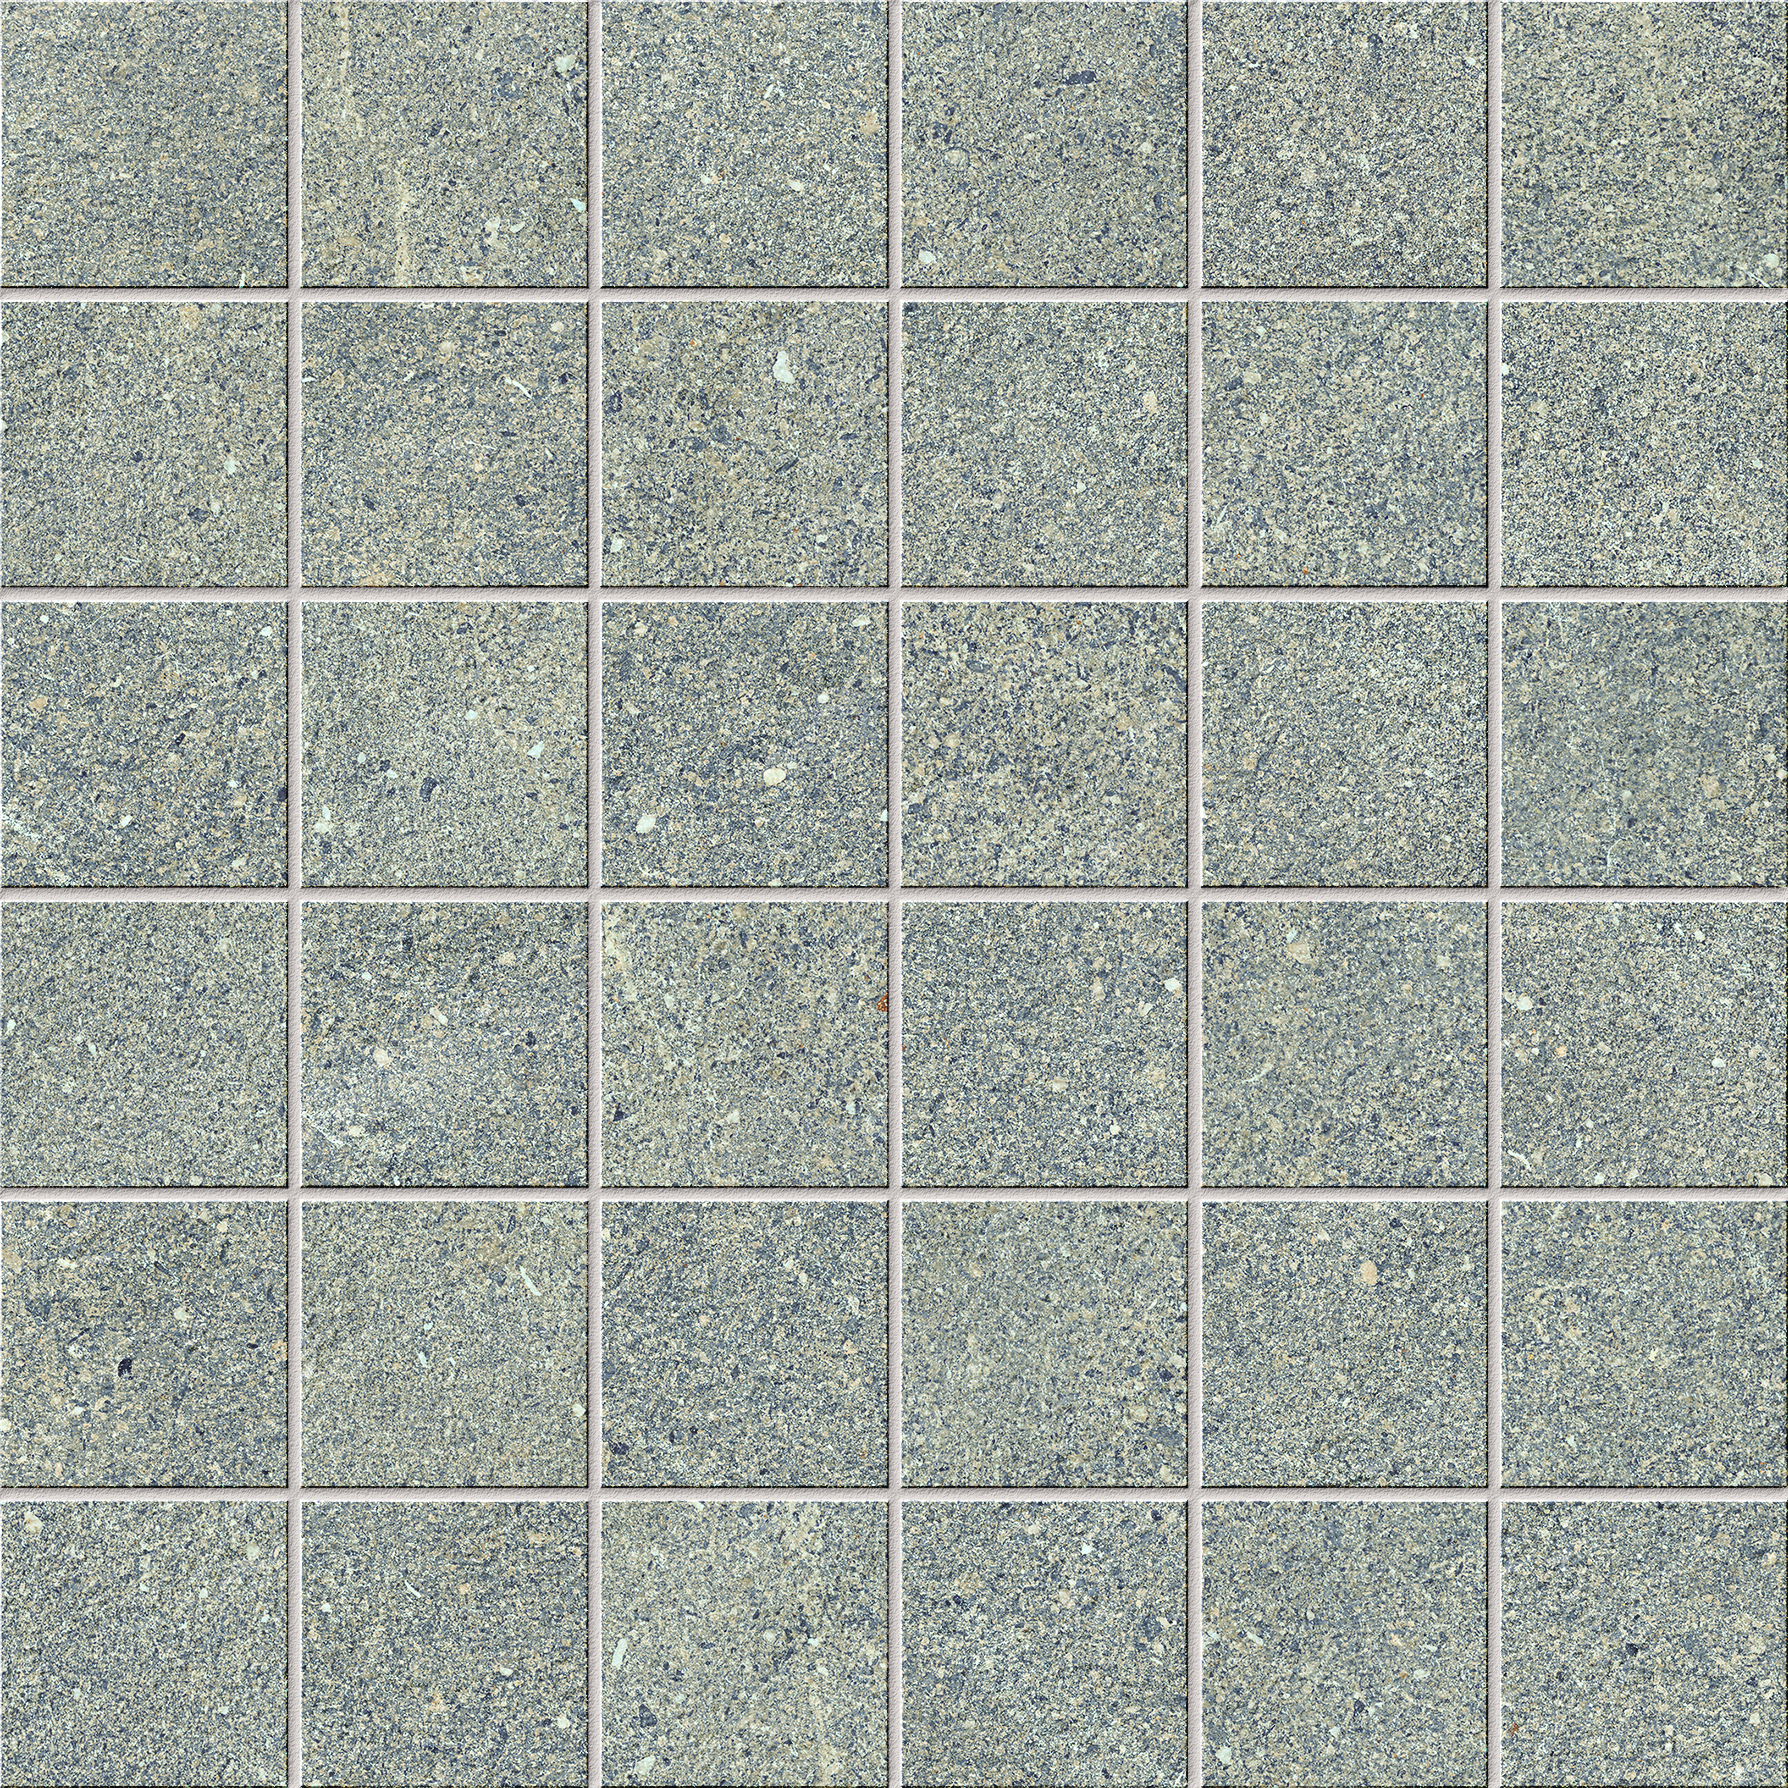 Serenissima Eclettica Piombo Naturale Mosaic 5x5 1082041 30x30cm rectified 9,5mm